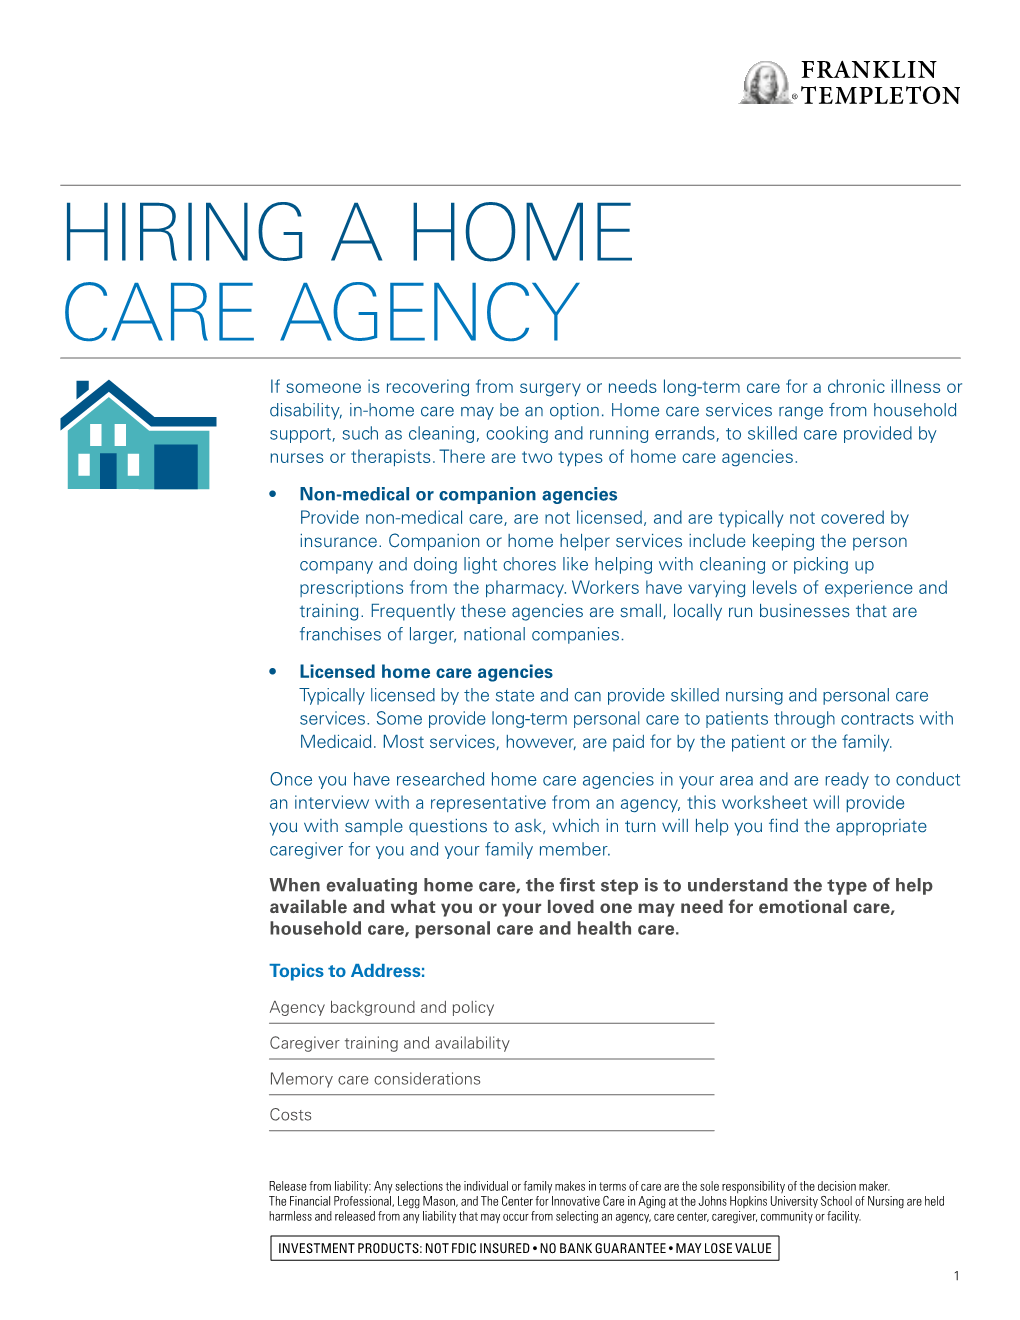 Hiring a Home Care Agency Worksheet